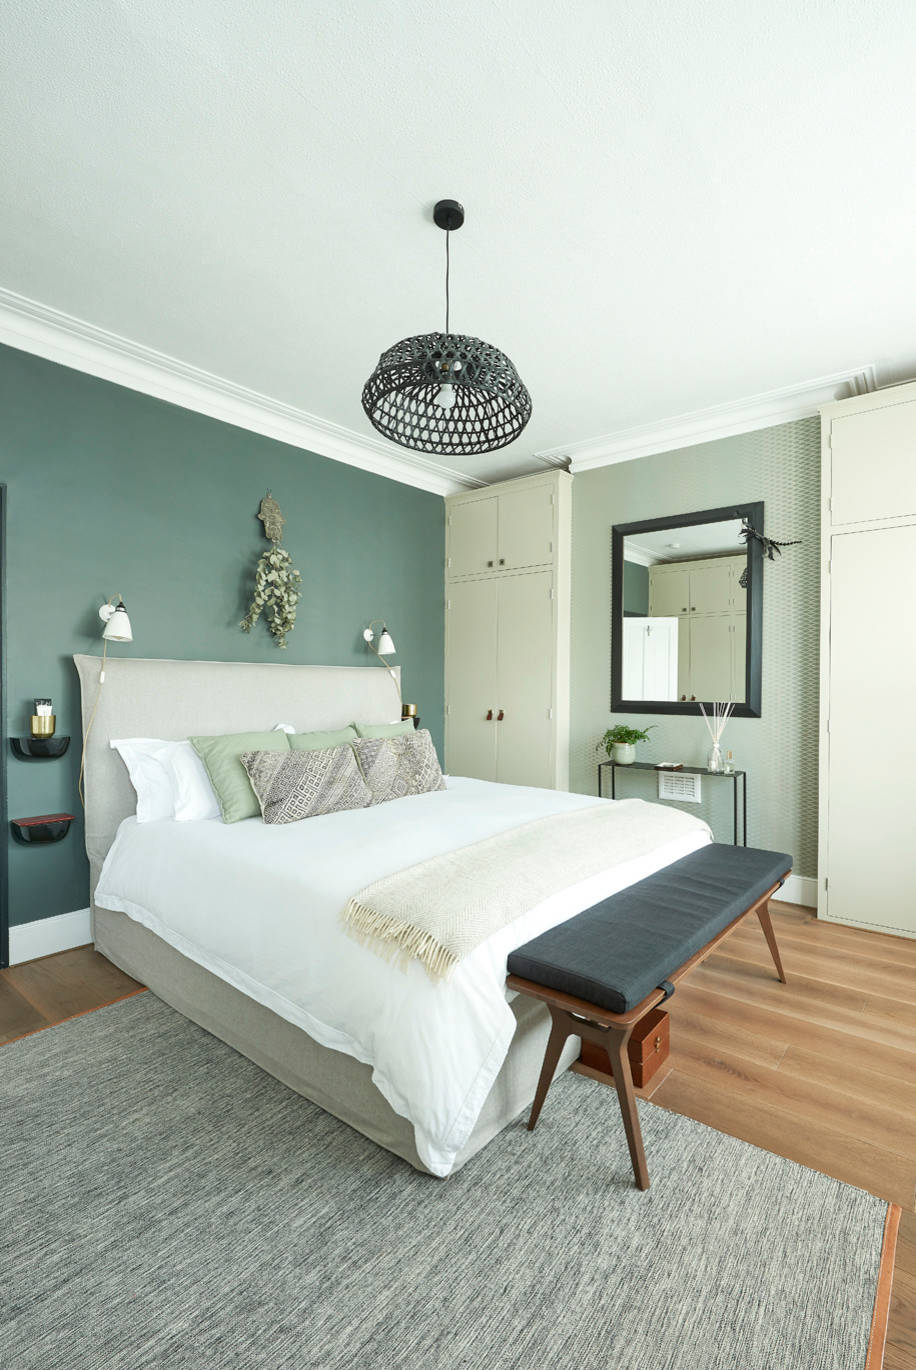 75 Bedroom with Green Walls Ideas You'll Love - April, 2023 | Houzz